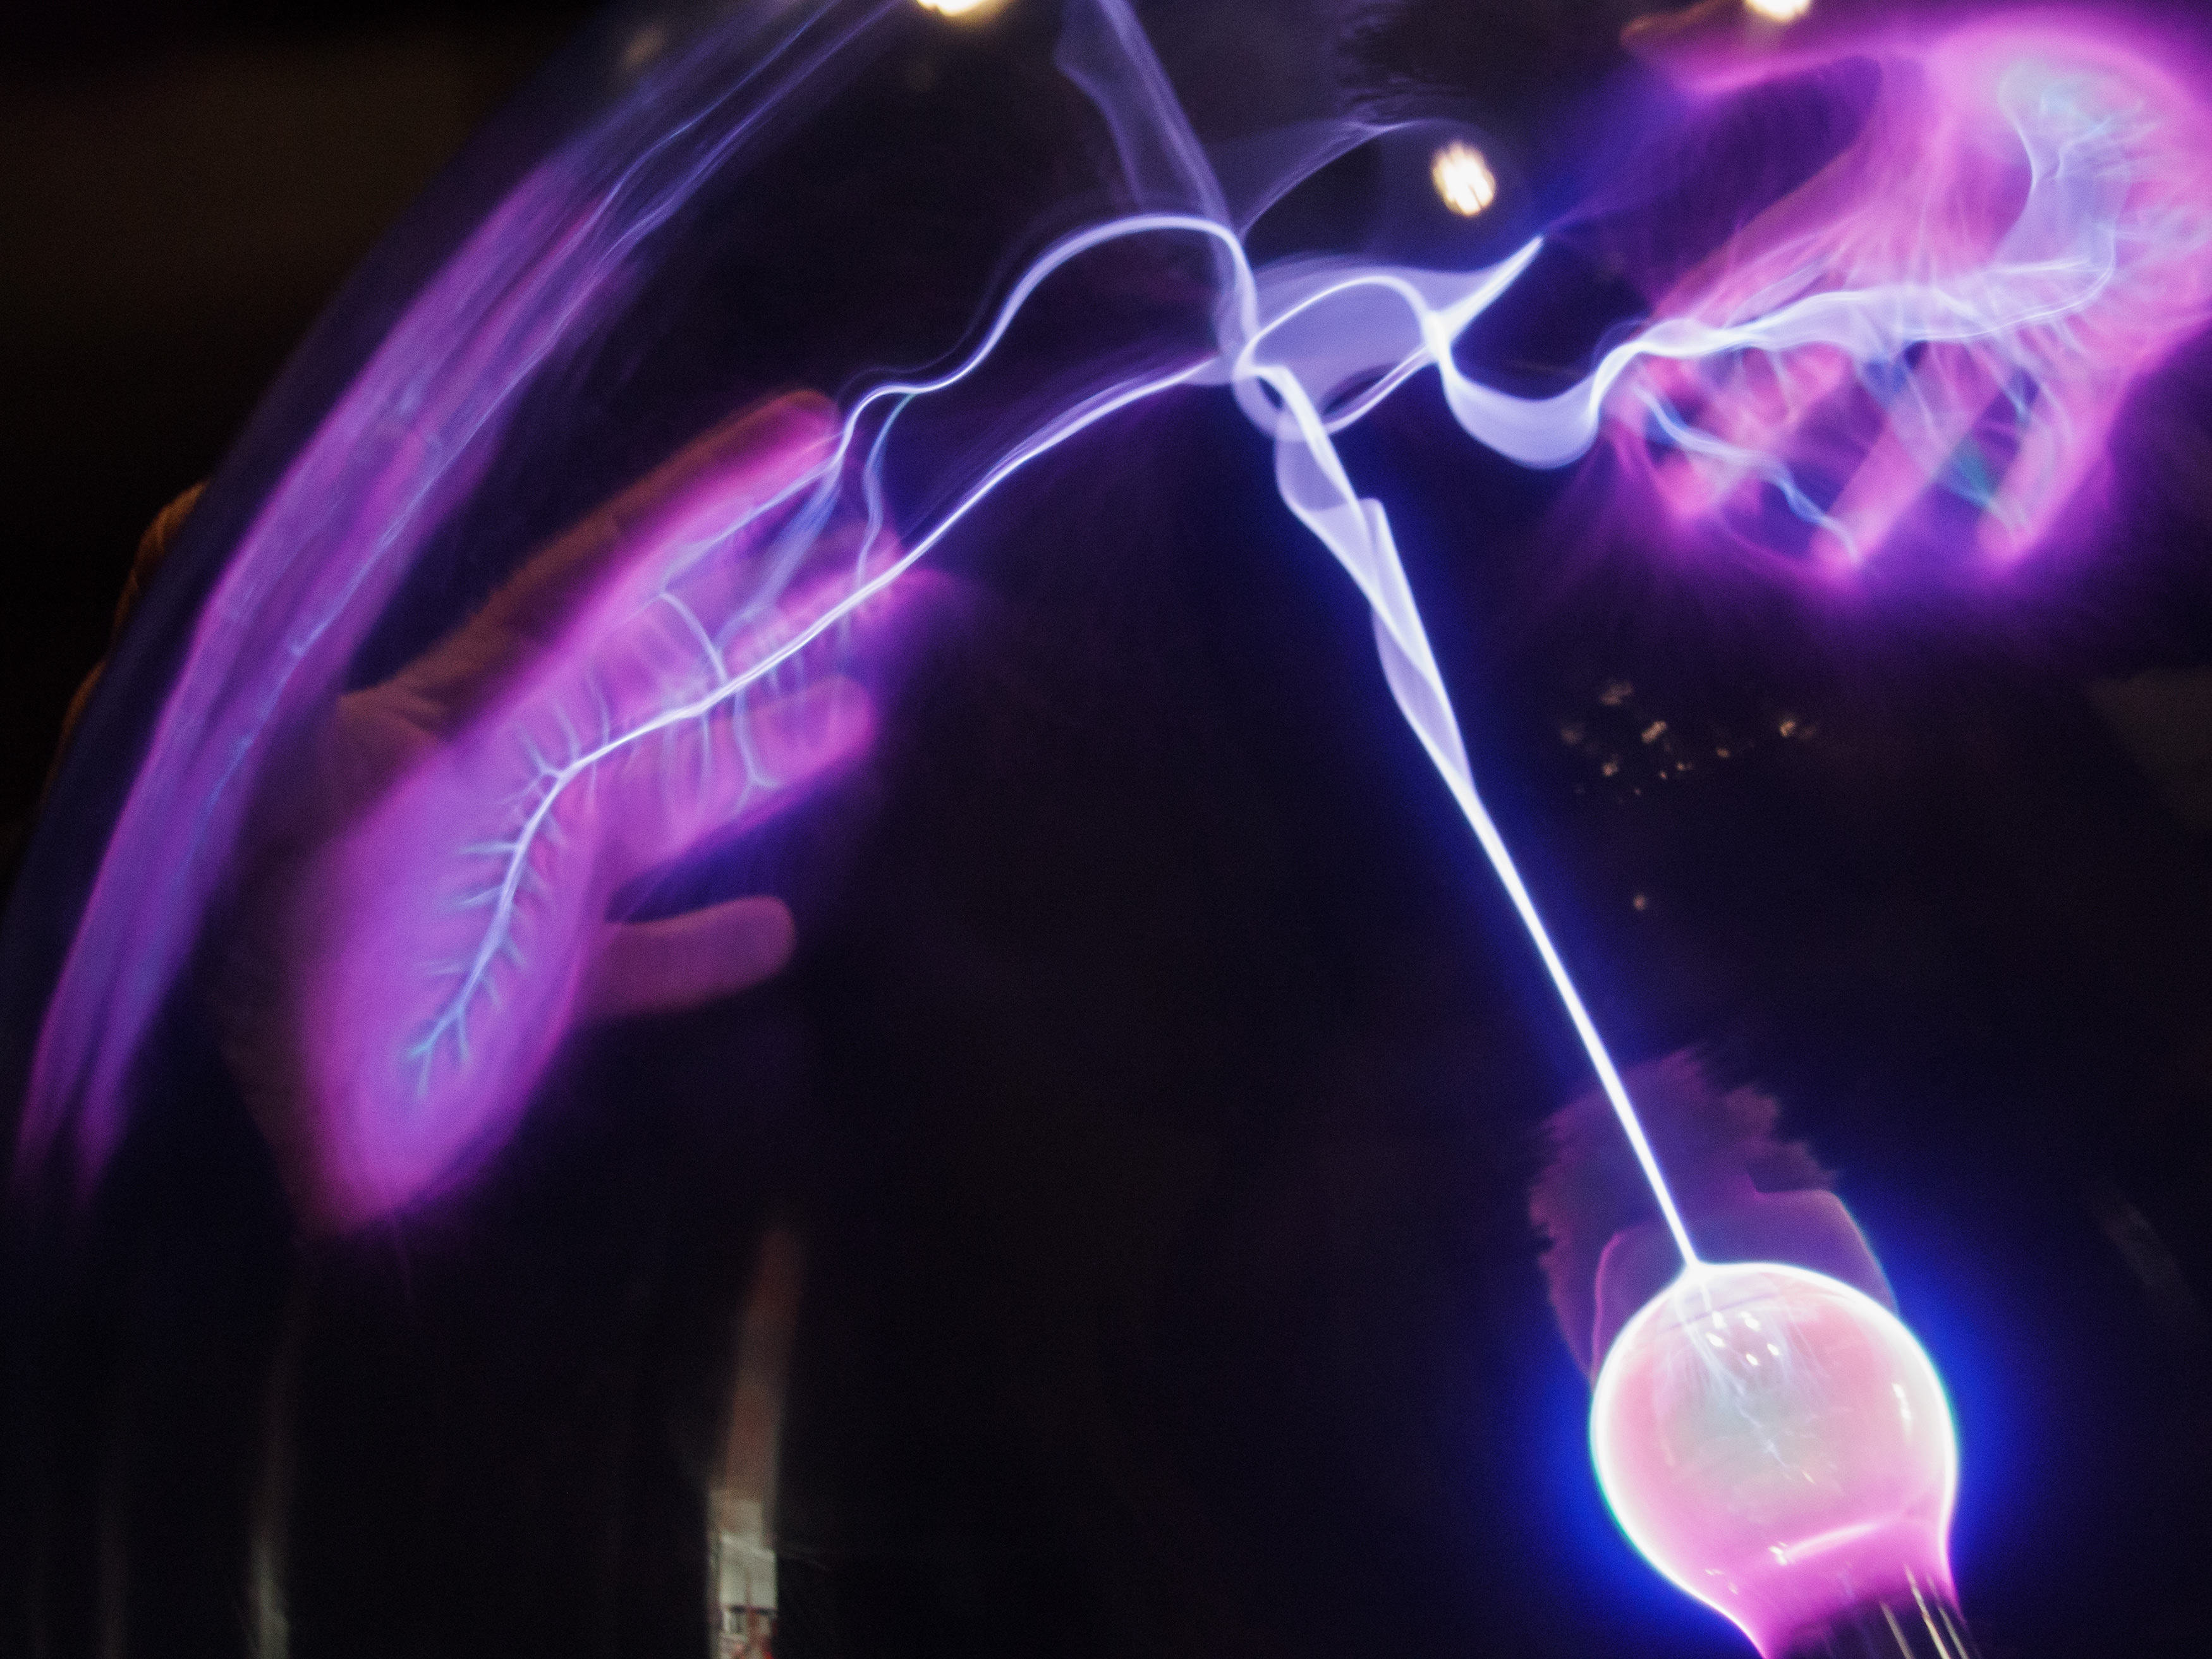 Plasma Electric Globe With Hands | FREE image on LibreShot
